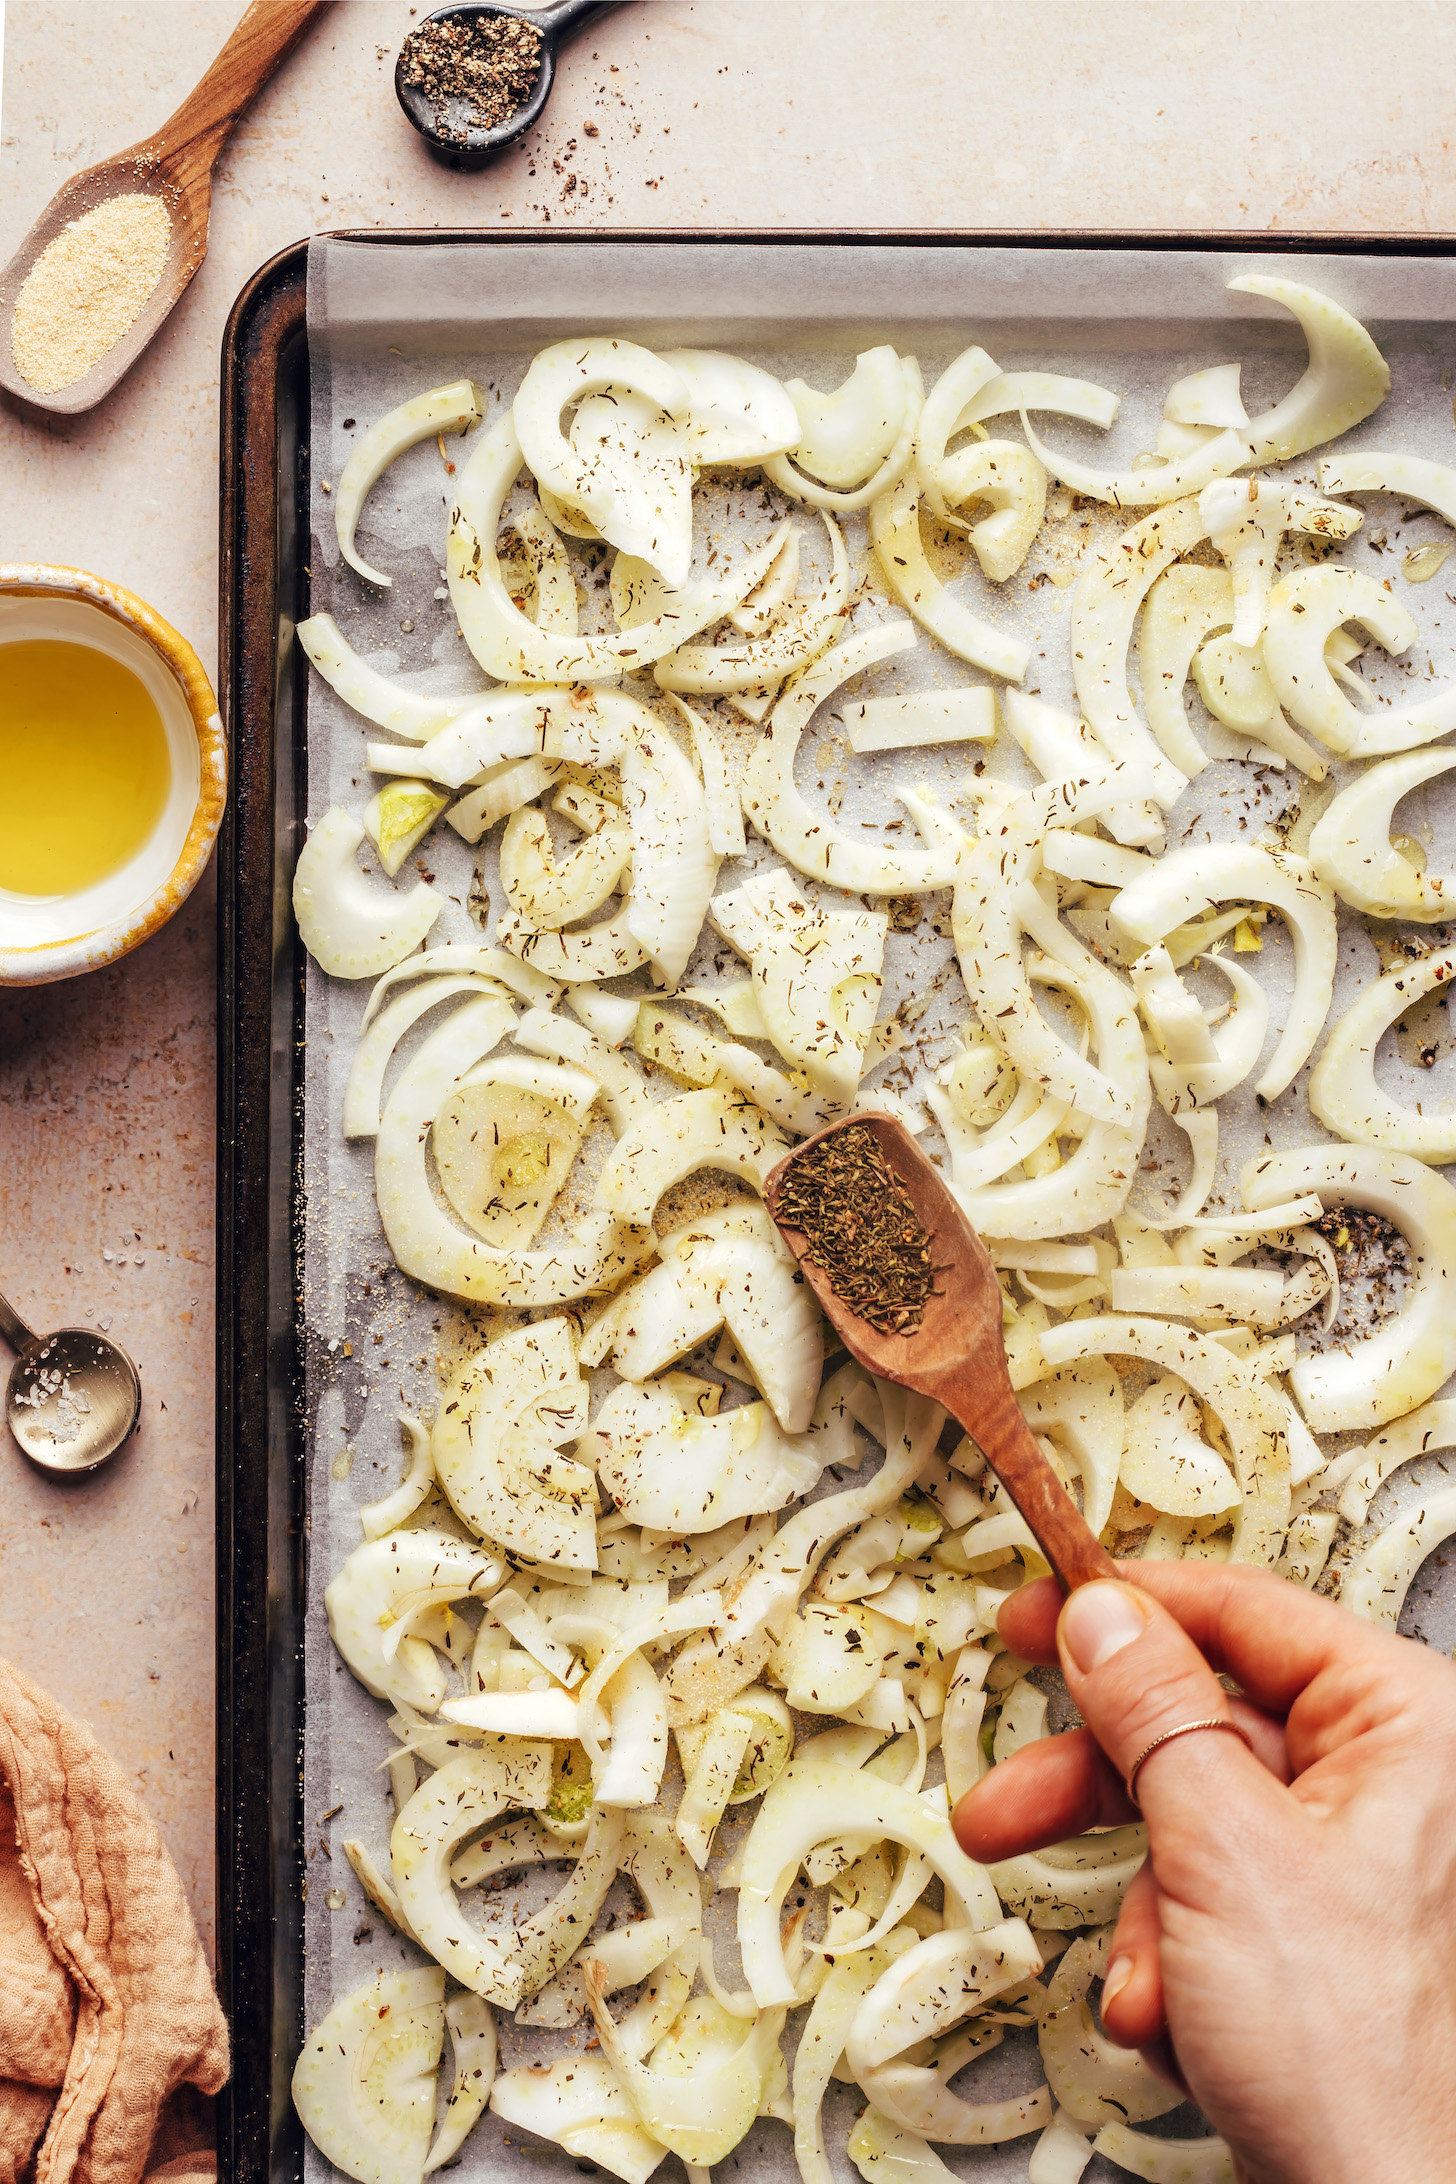 Sprinkling dried thyme over sliced fennel